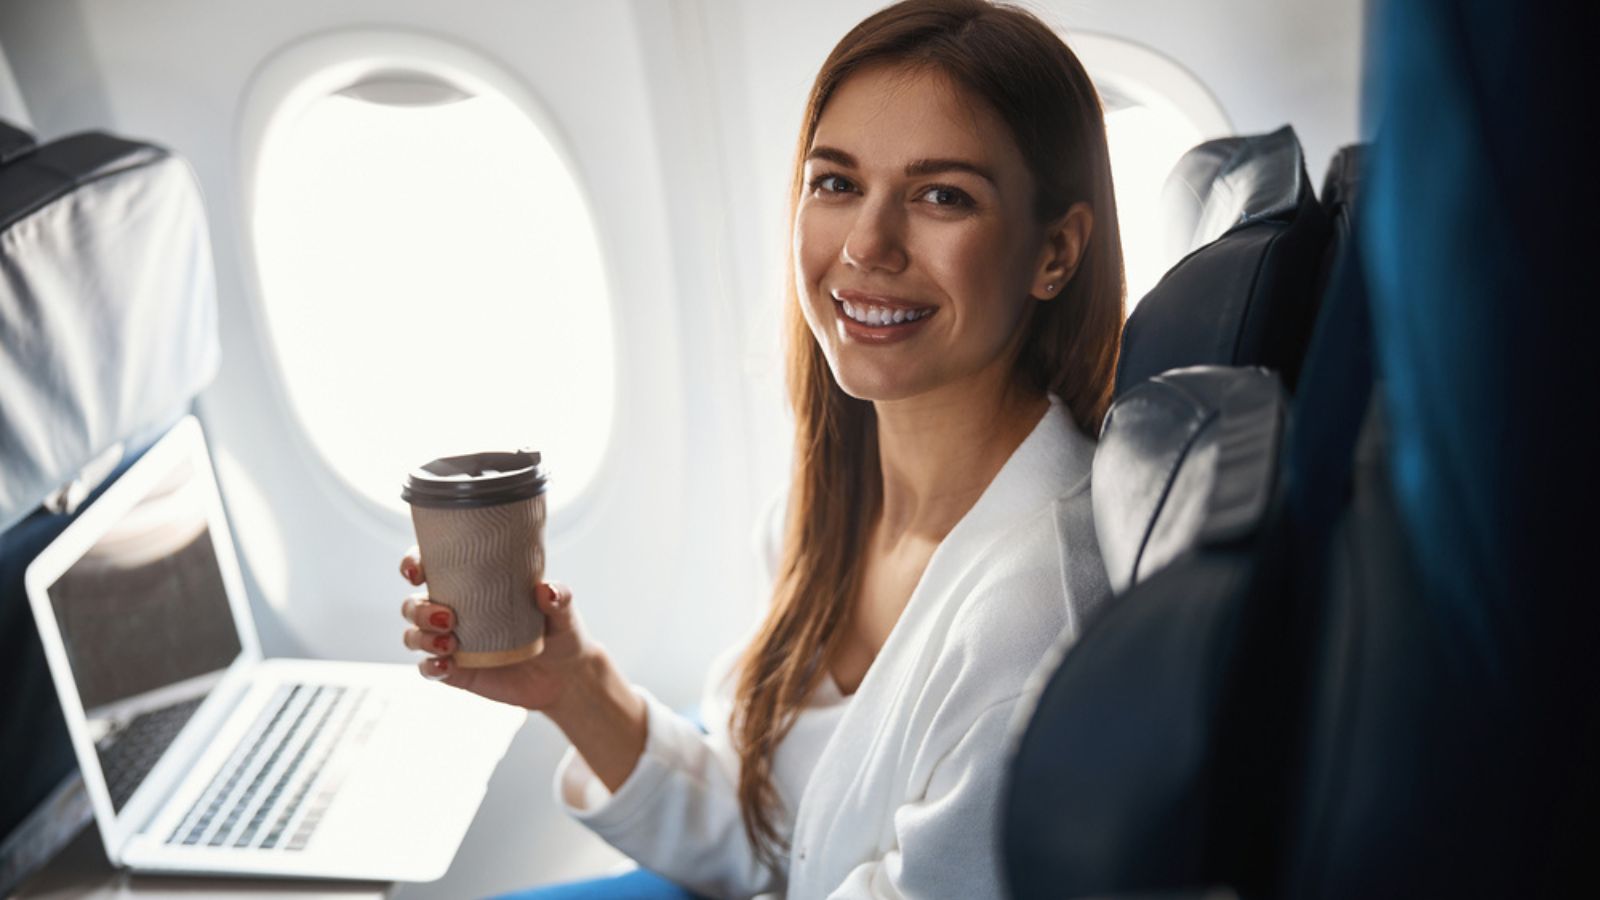 Woman seated at the window side in airplane drinking hot beverage with laptop.jpg